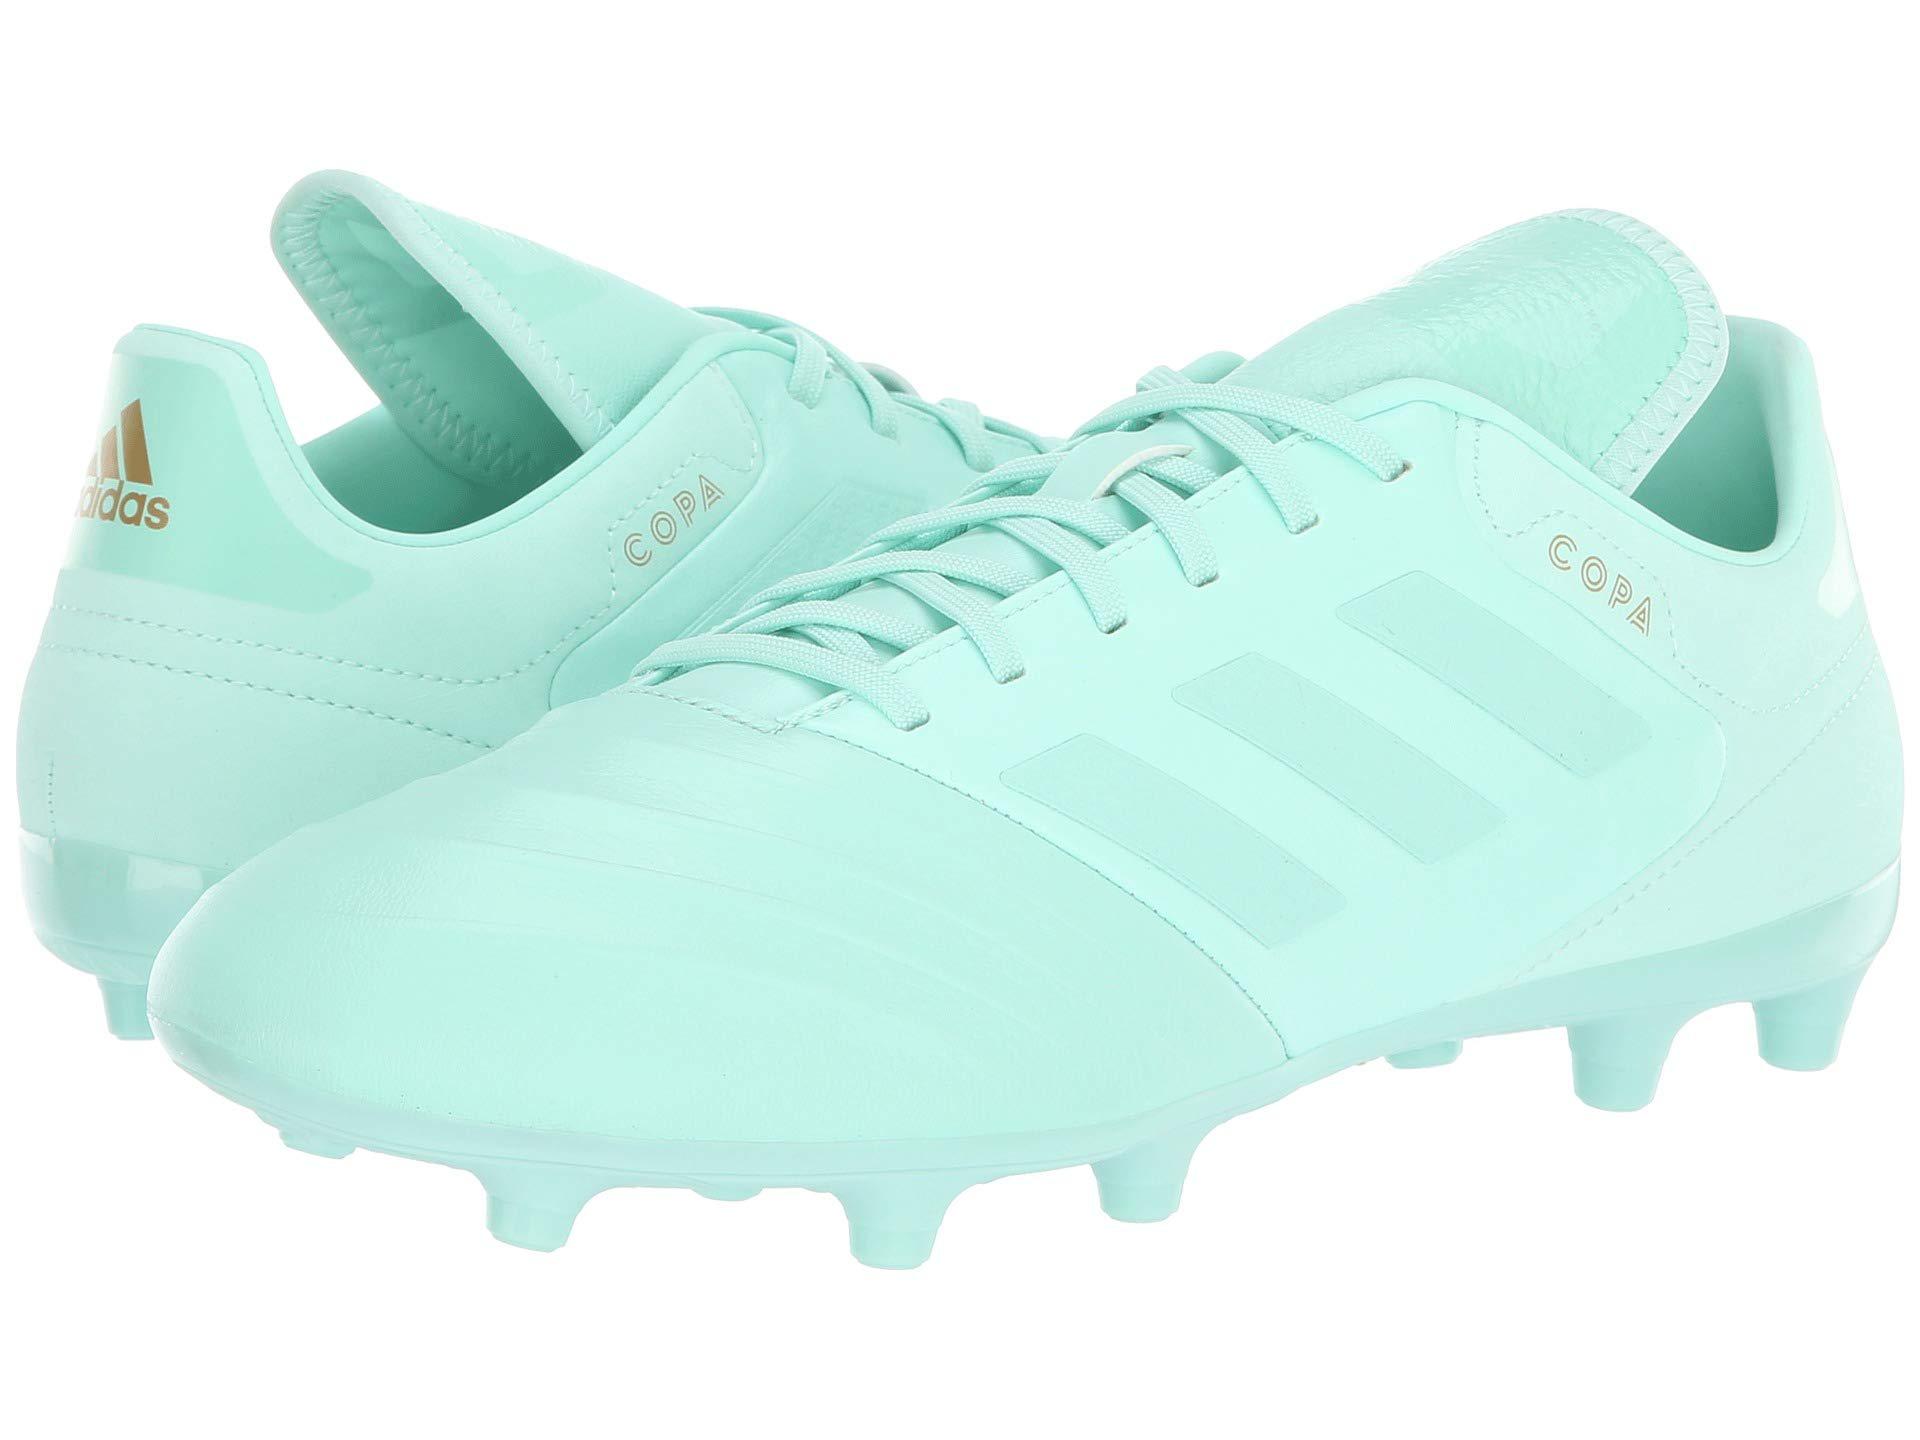 adidas Leather Copa 18.3 Fg (clear Mint/clear Mint/gold Metallic) Men's  Soccer Shoes for Men - Lyst